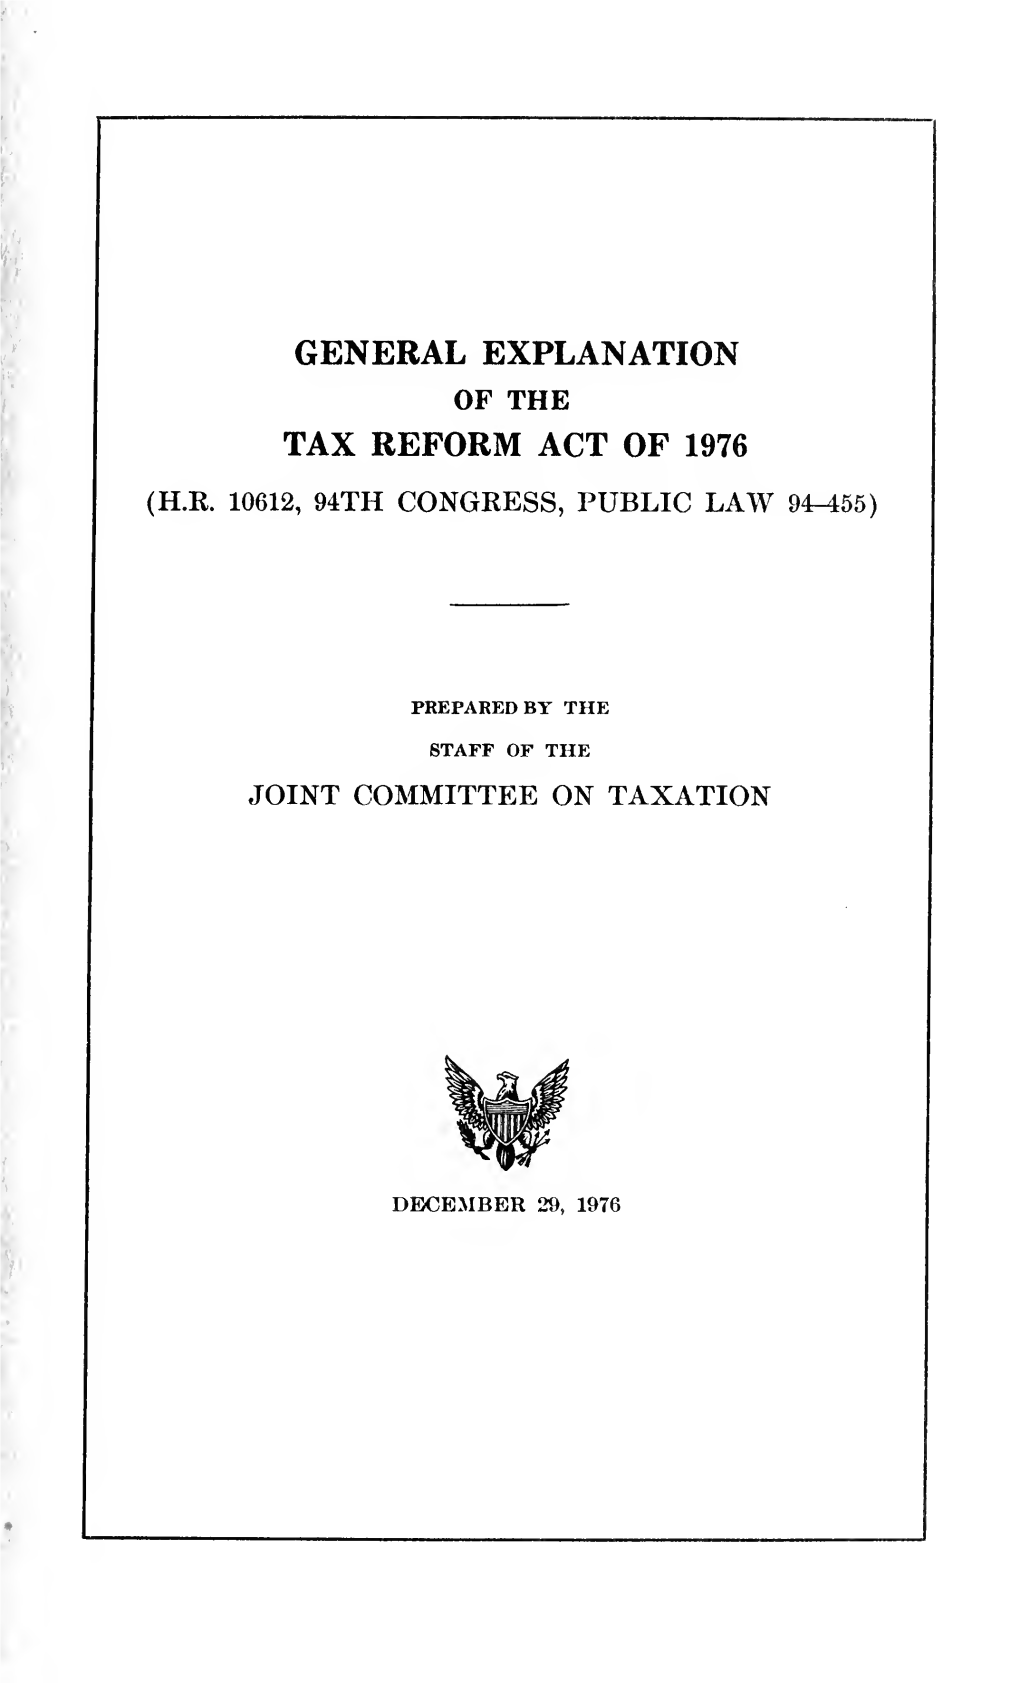 General Explanation of the Tax Reform Act of 1976